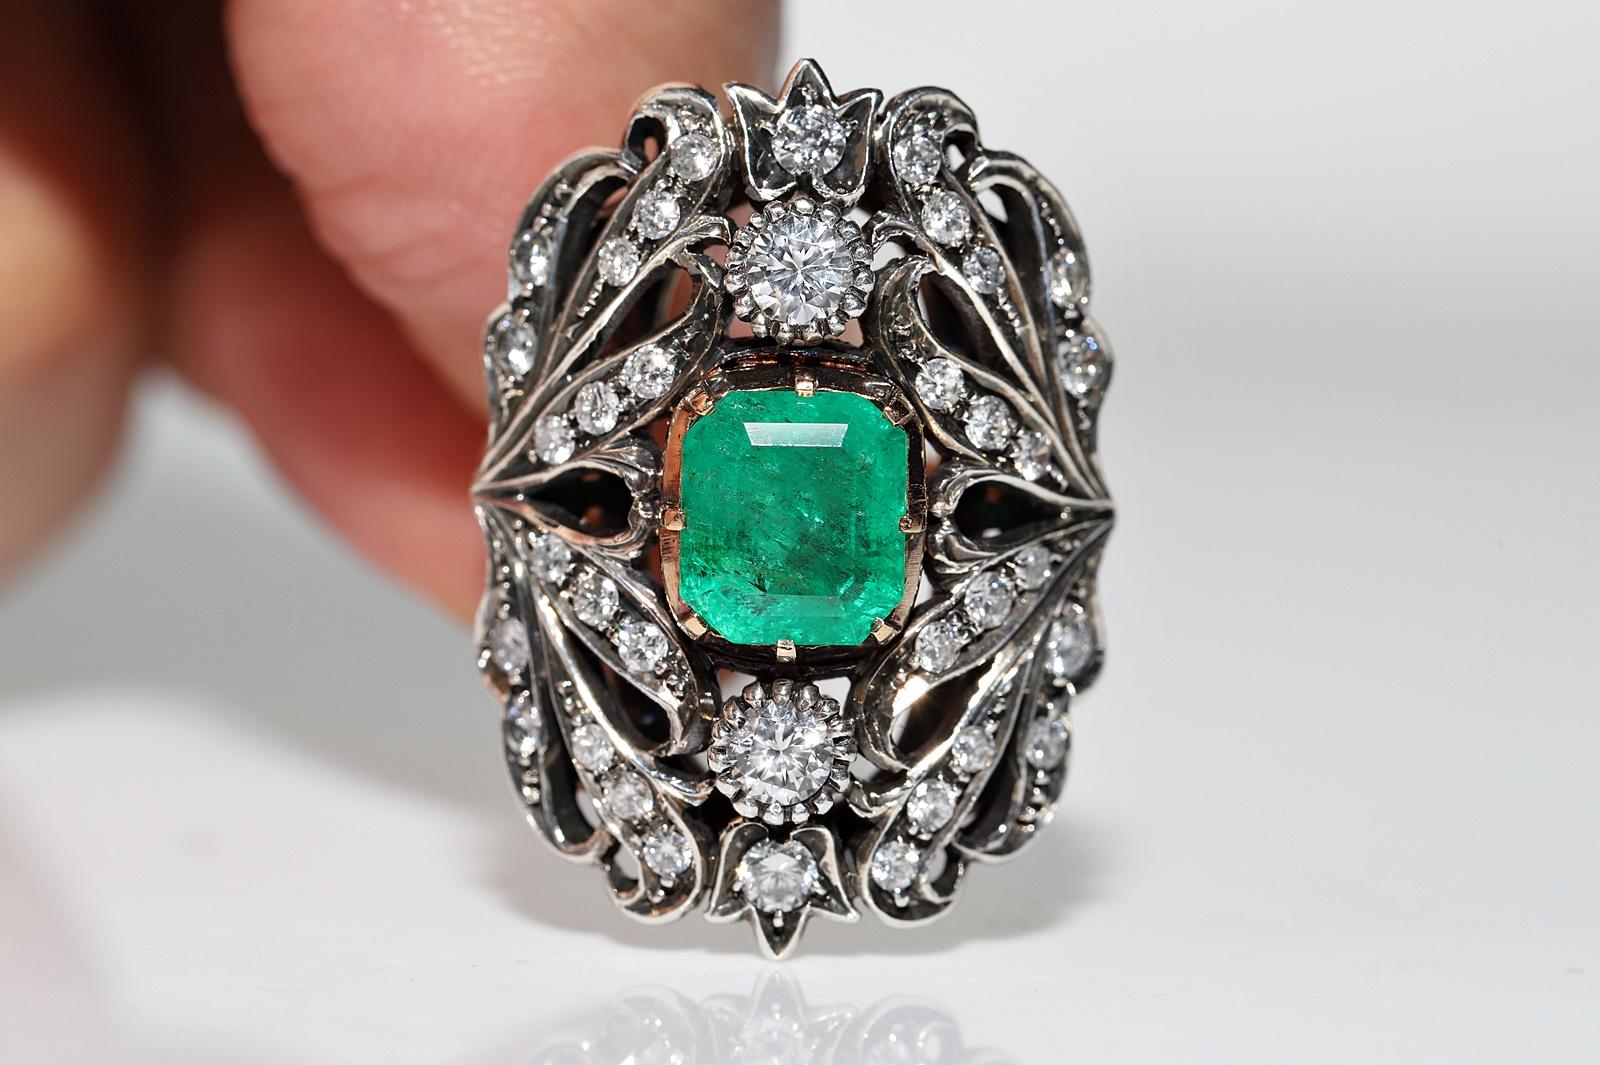 In very good condition.
Total weight is 12.6 grams.
Totally is diamond 1.50 ct.
The diamond is has H color and vs-s1-s2 clarity.
Totally is emerald 1.55 ct.
Ring size is US 7 (We offer free resizing)
We can make any size.
Please contact for any